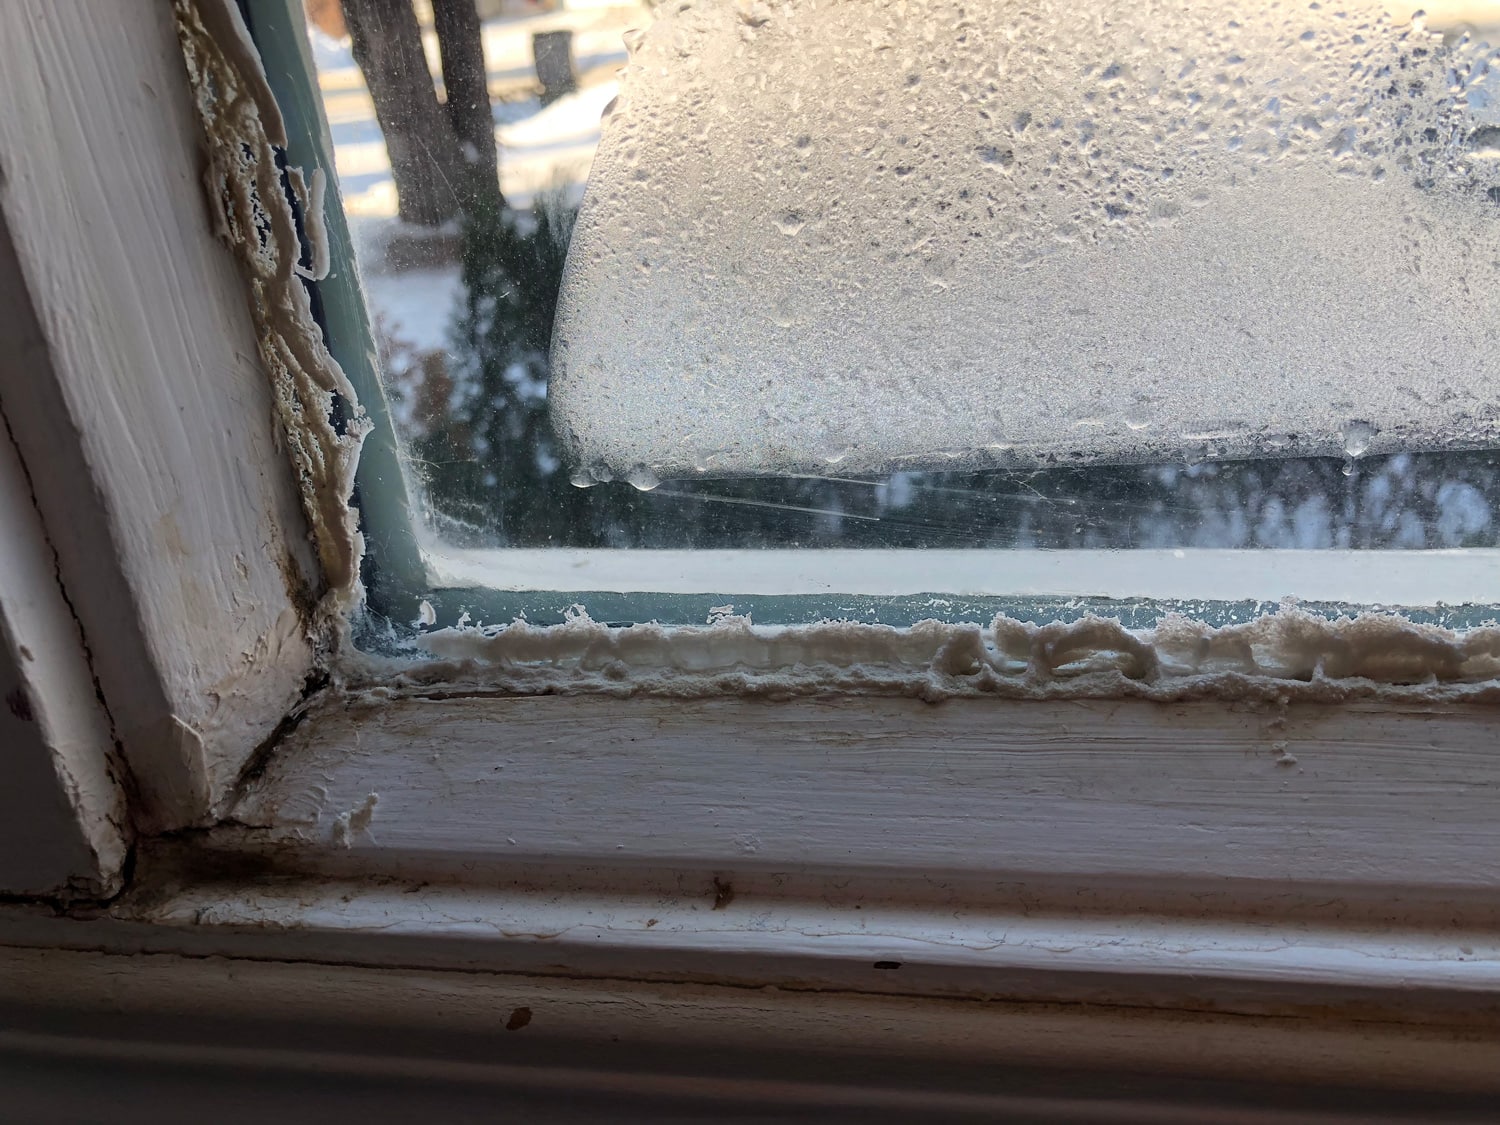 Old windows in a home suffering from moisture problems.